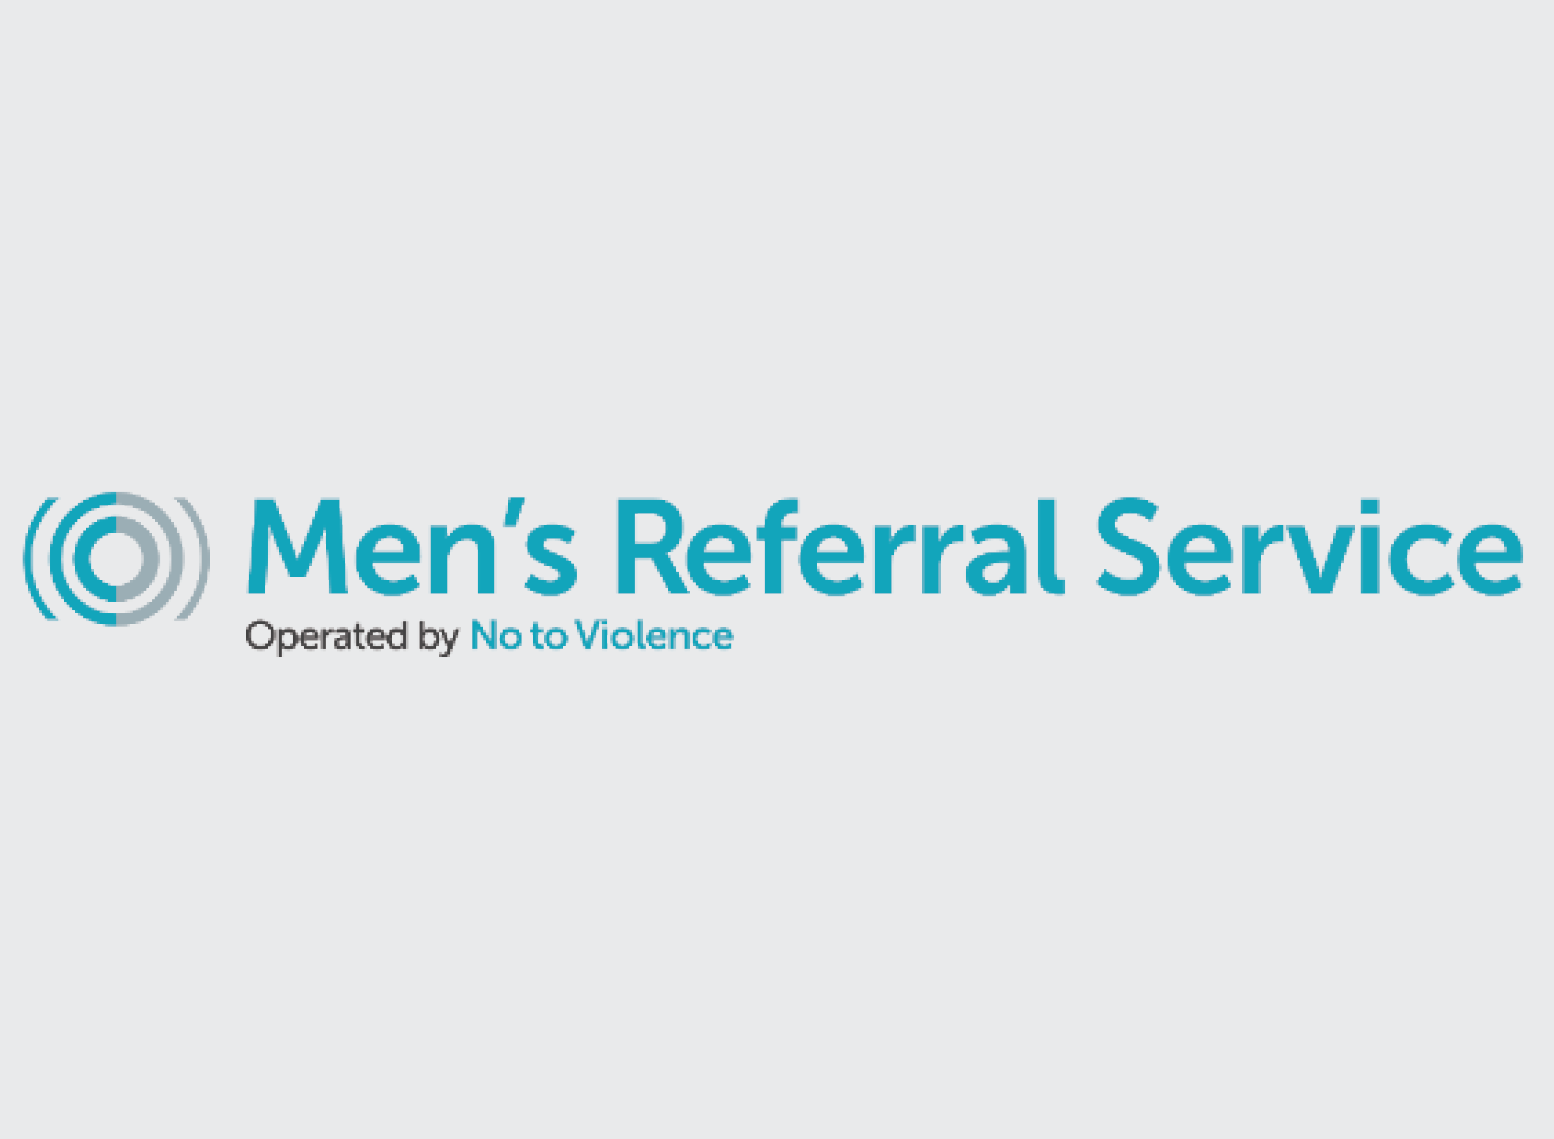 If you are worried about doing coercive control to others you can call Mens Referral Service.